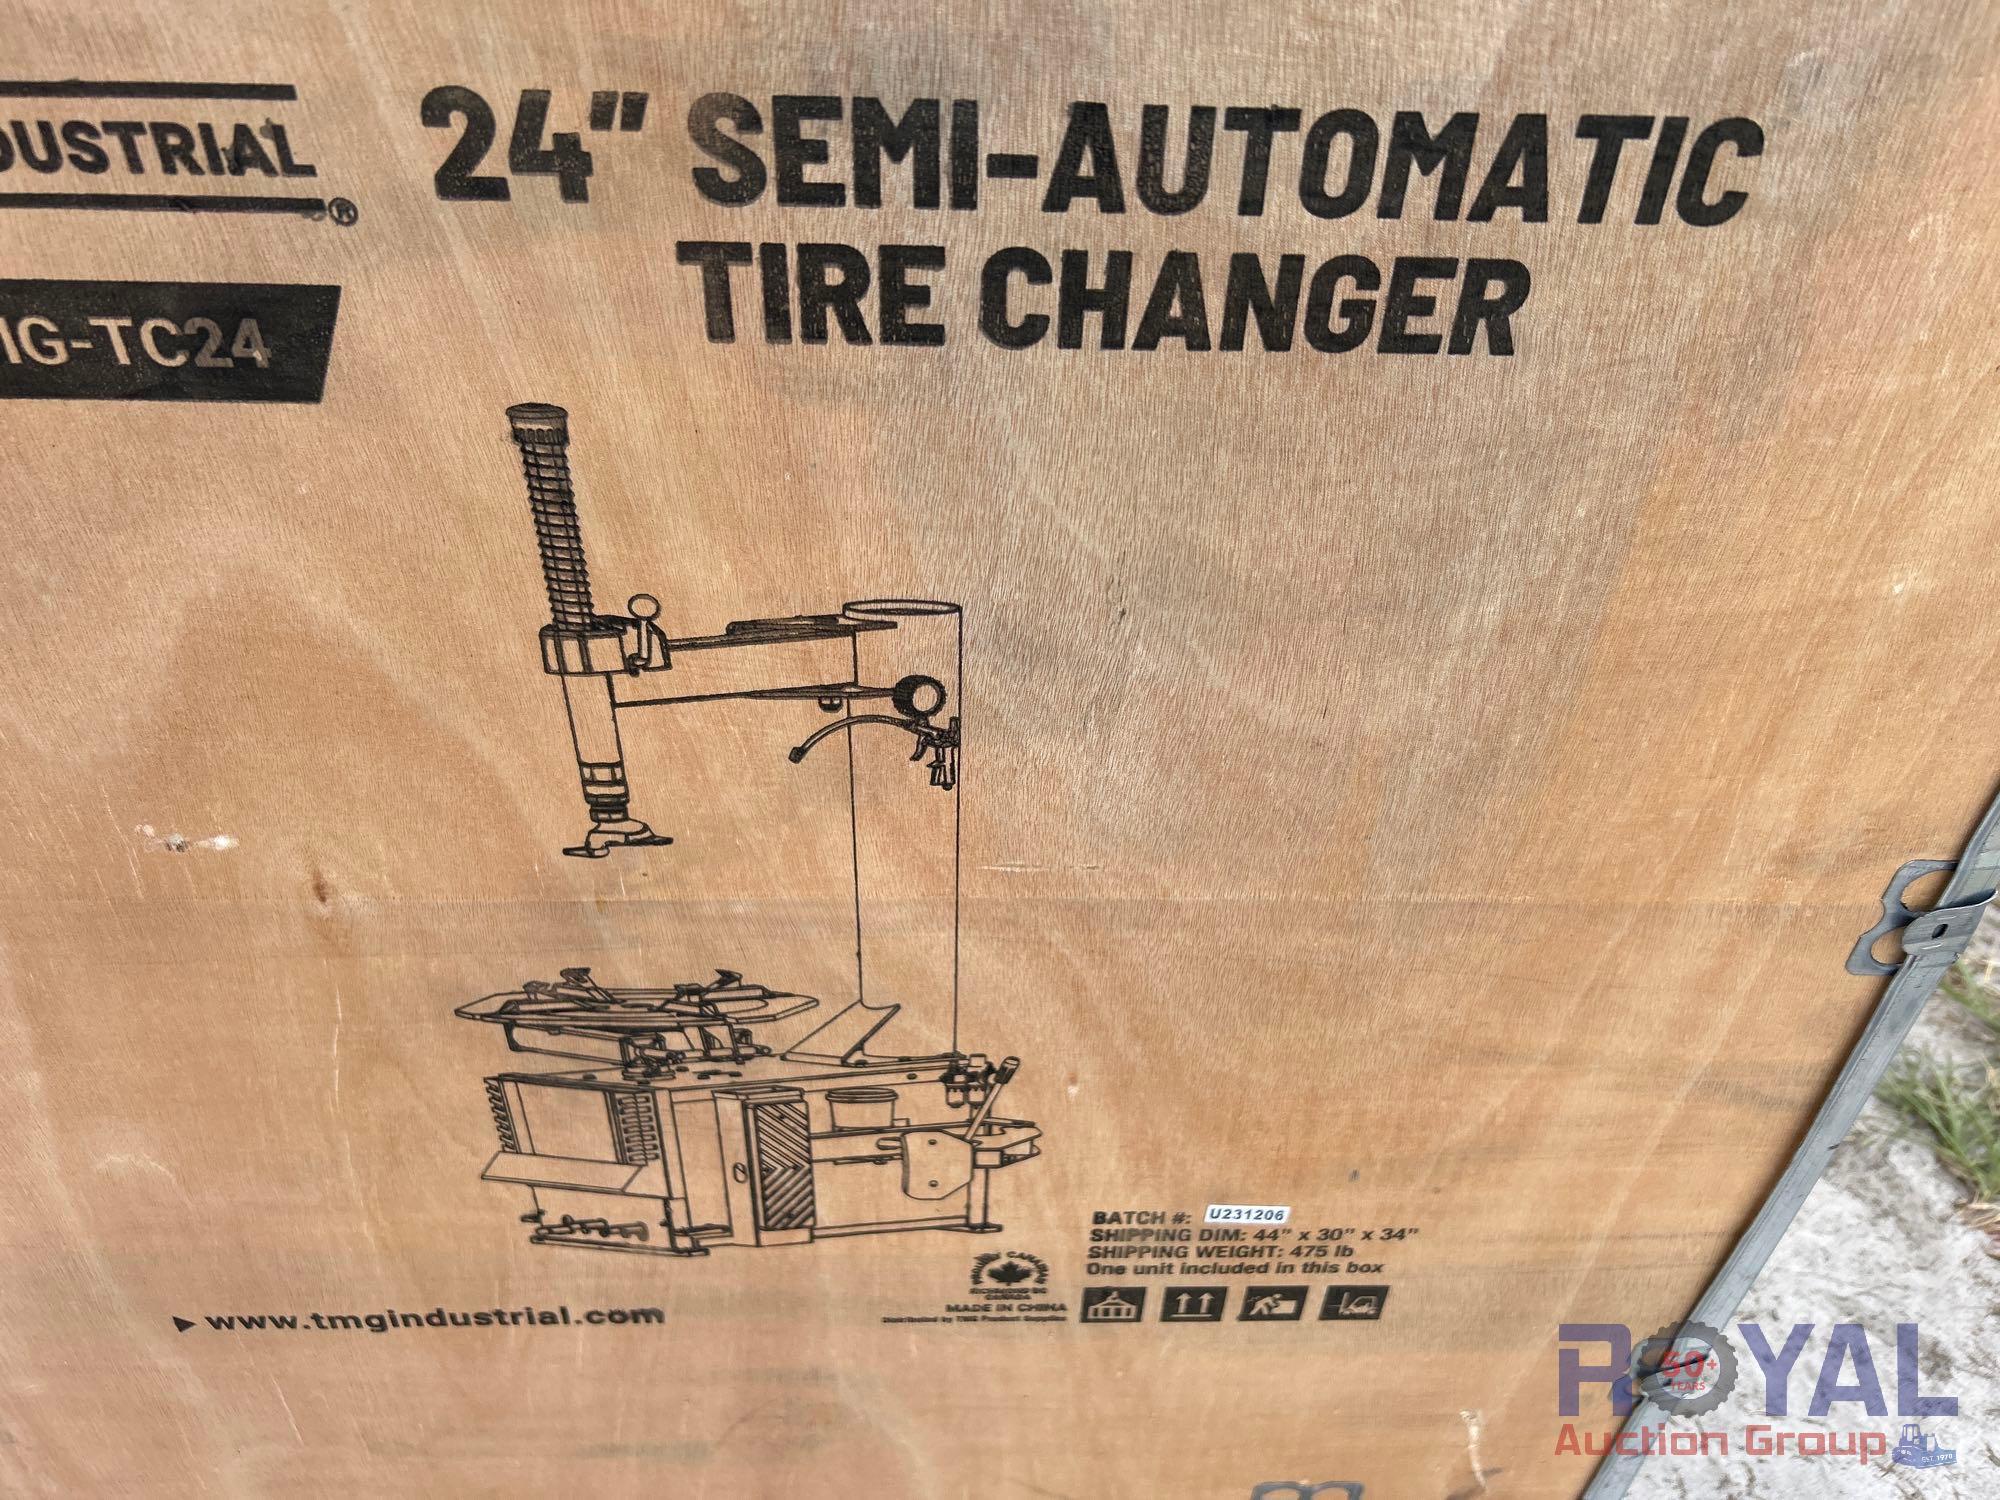 2024 TMG Industrial 24in Semi Automatic Tire Changer